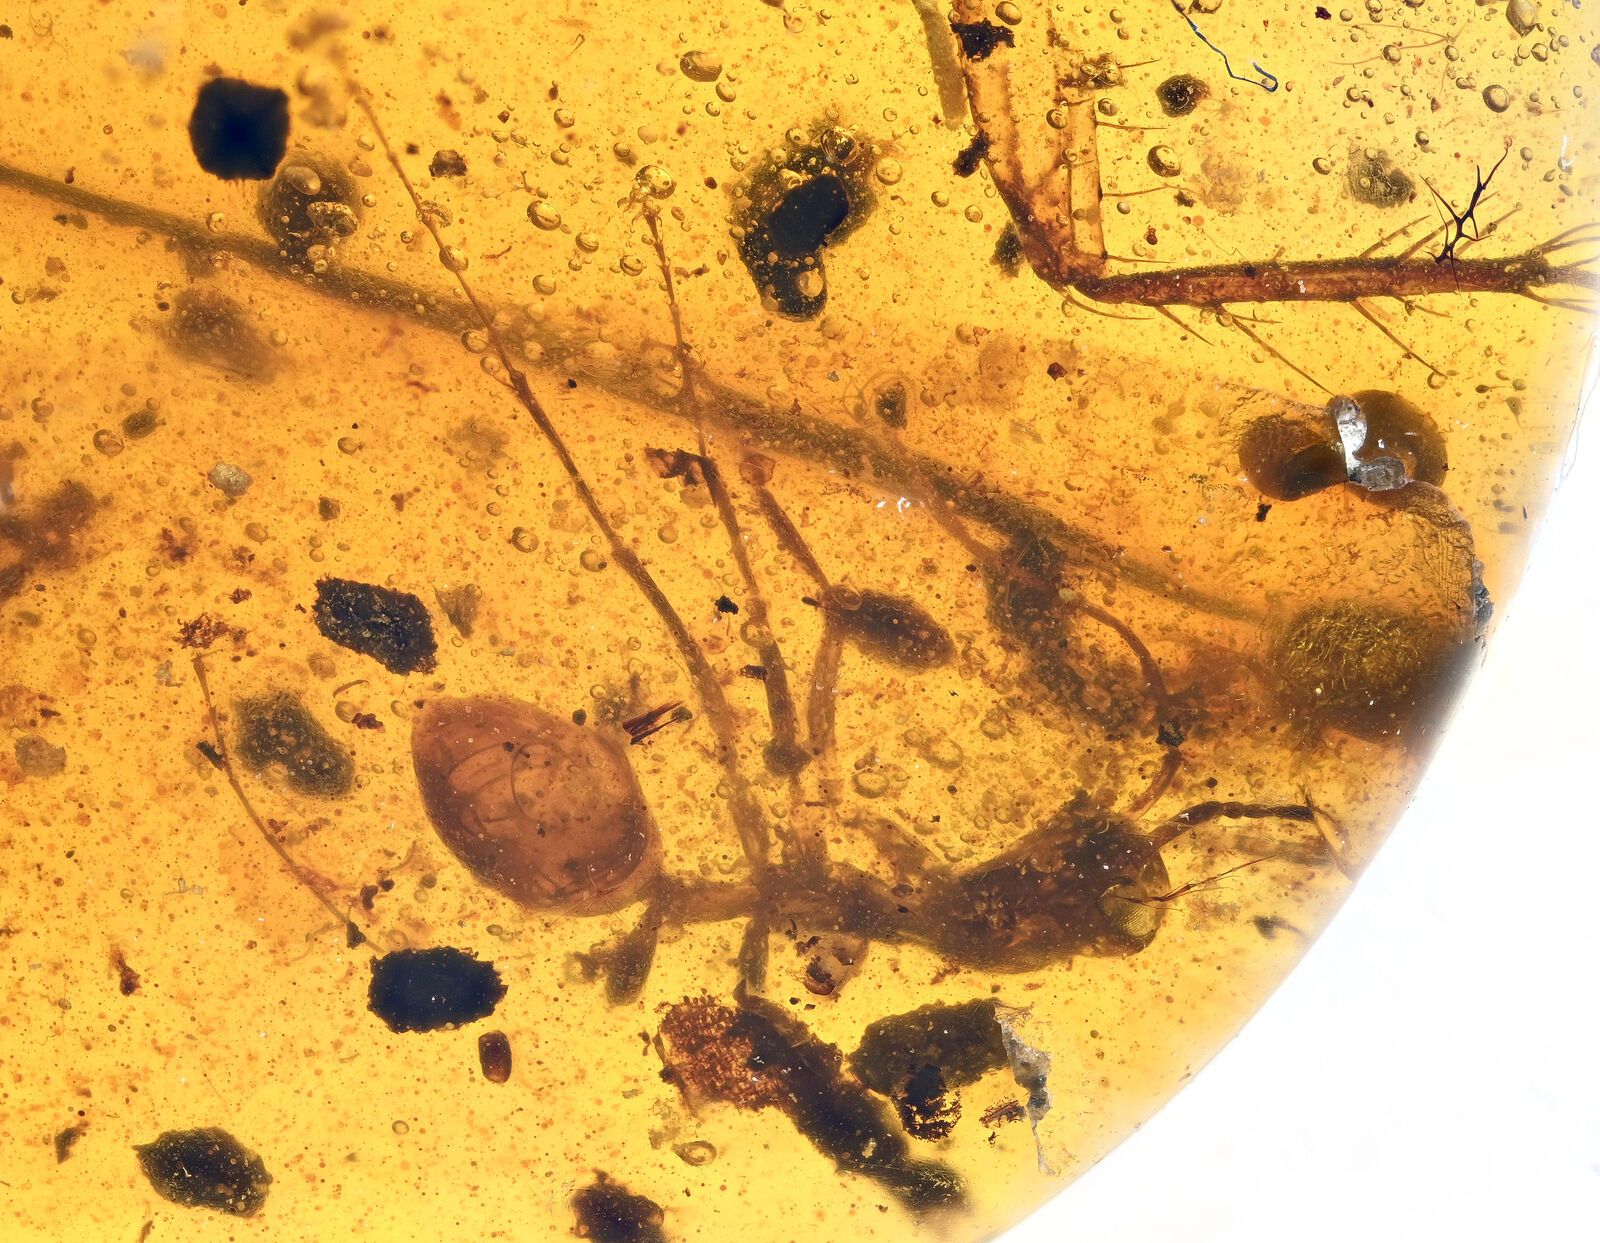 Extinct Sphecomyrma Ant, Fossil inclusion in Burmese Amber